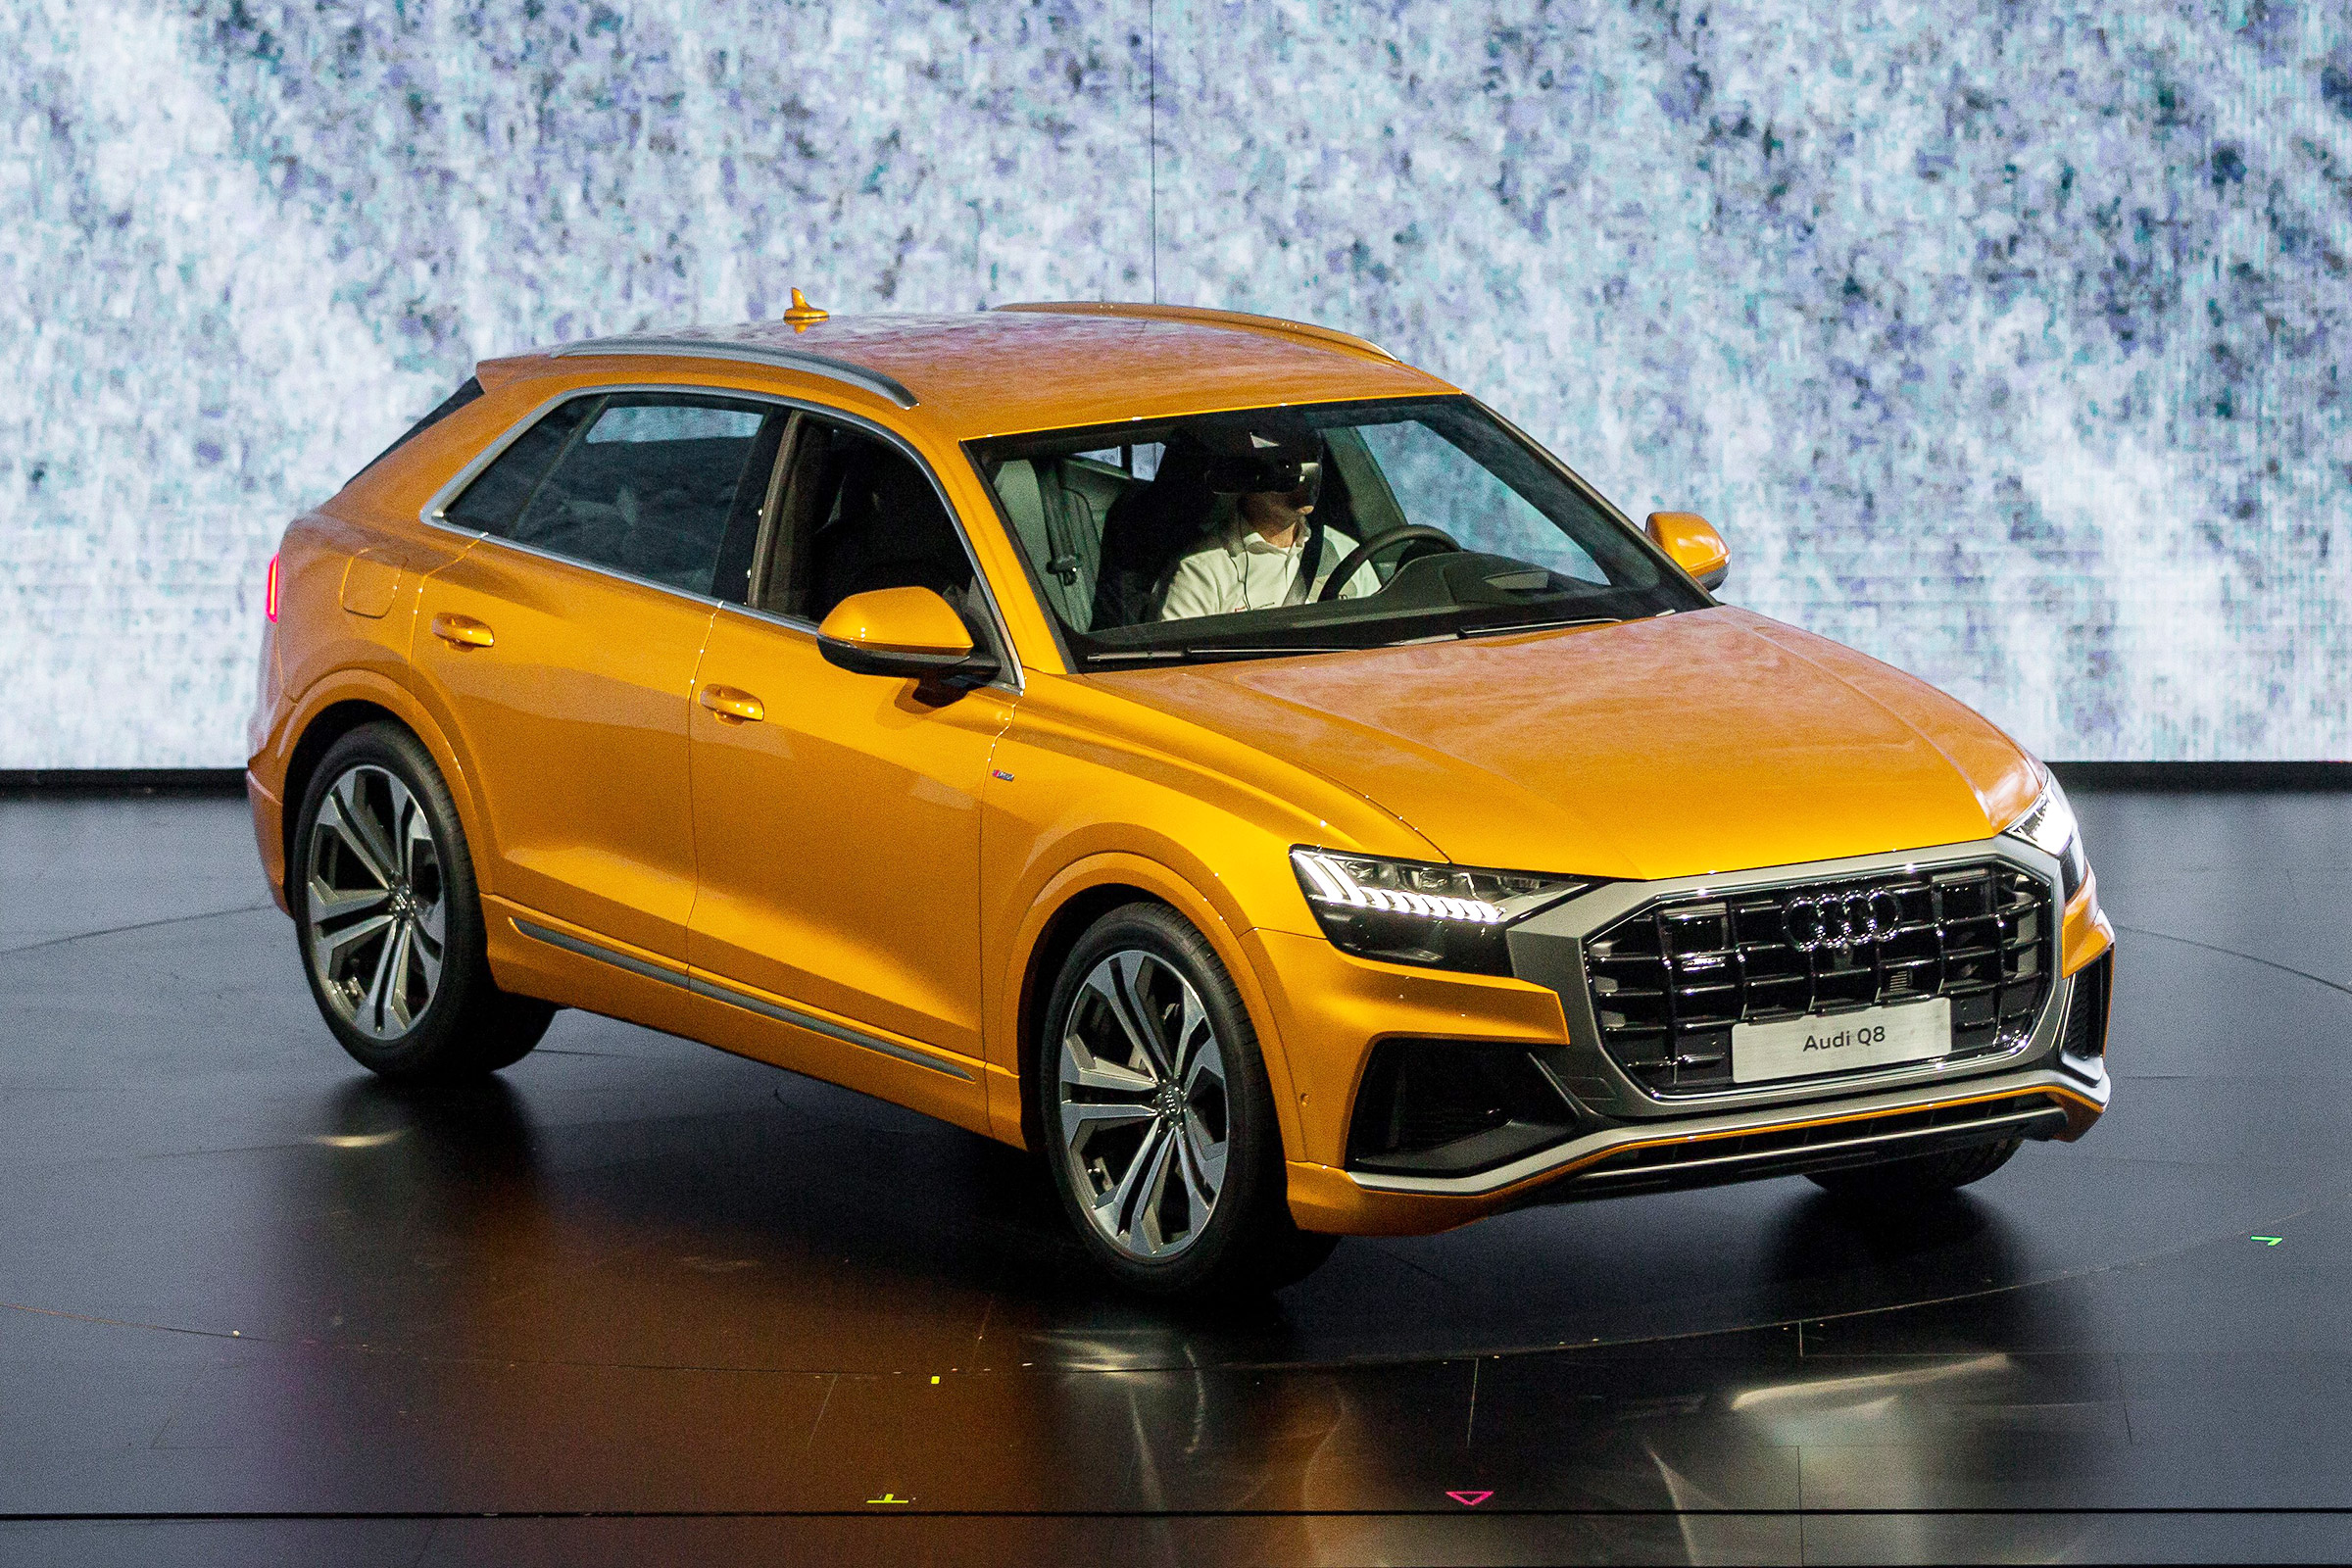 New 2018 Audi Q8 SUV full details and official pics Auto Express